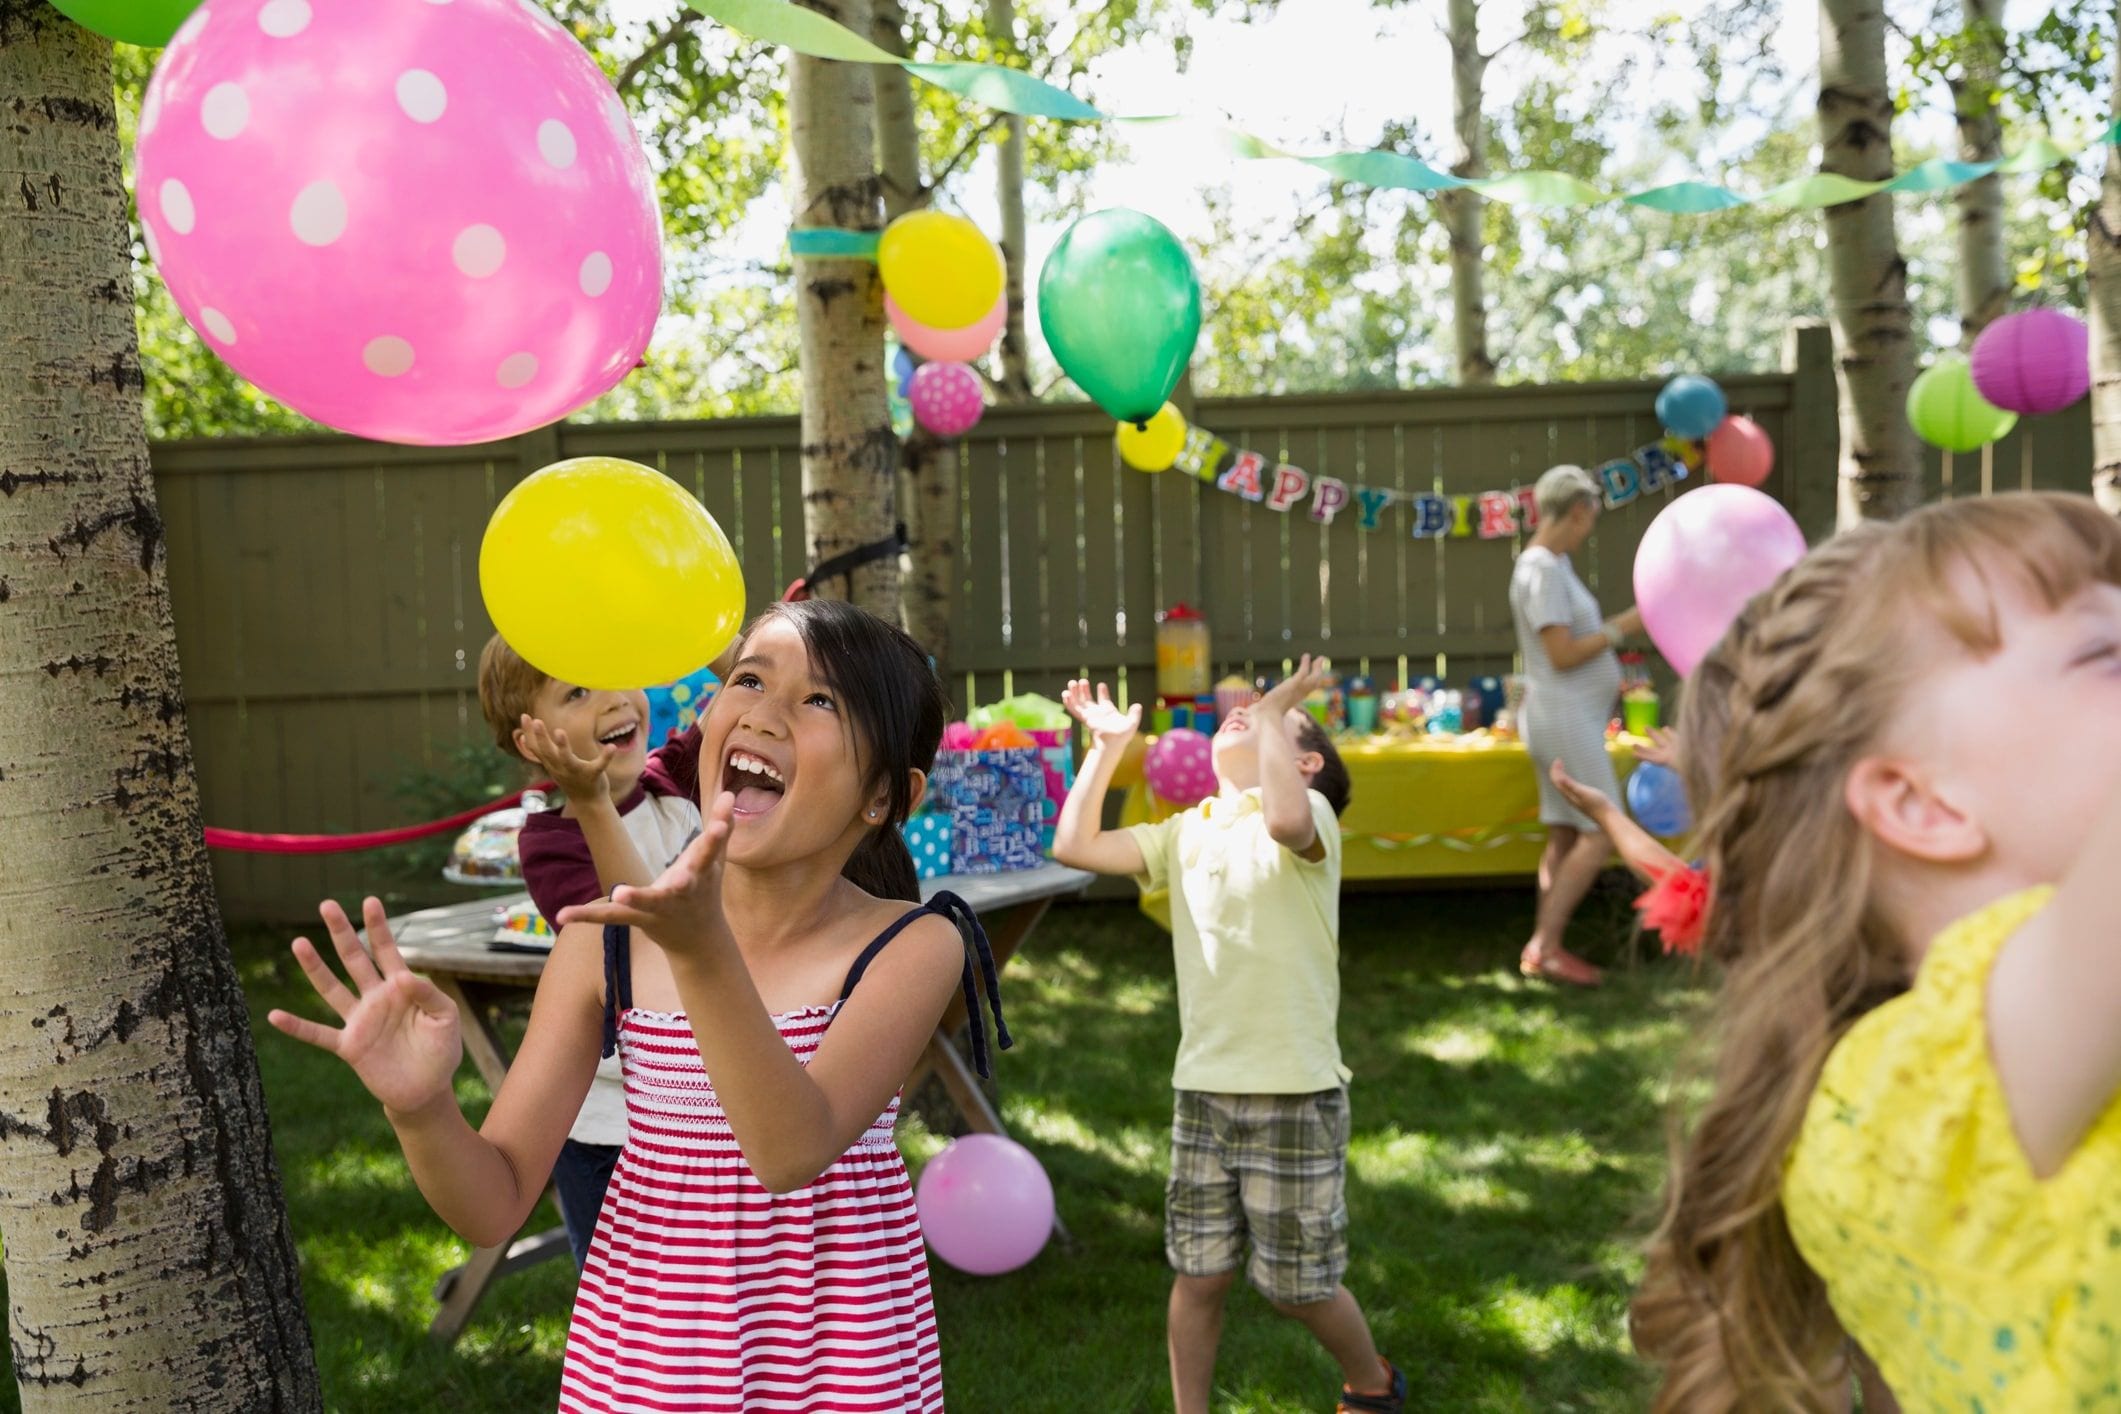 40 Activities for 8 Year Old Birthday Party - Life is Sweeter By Design